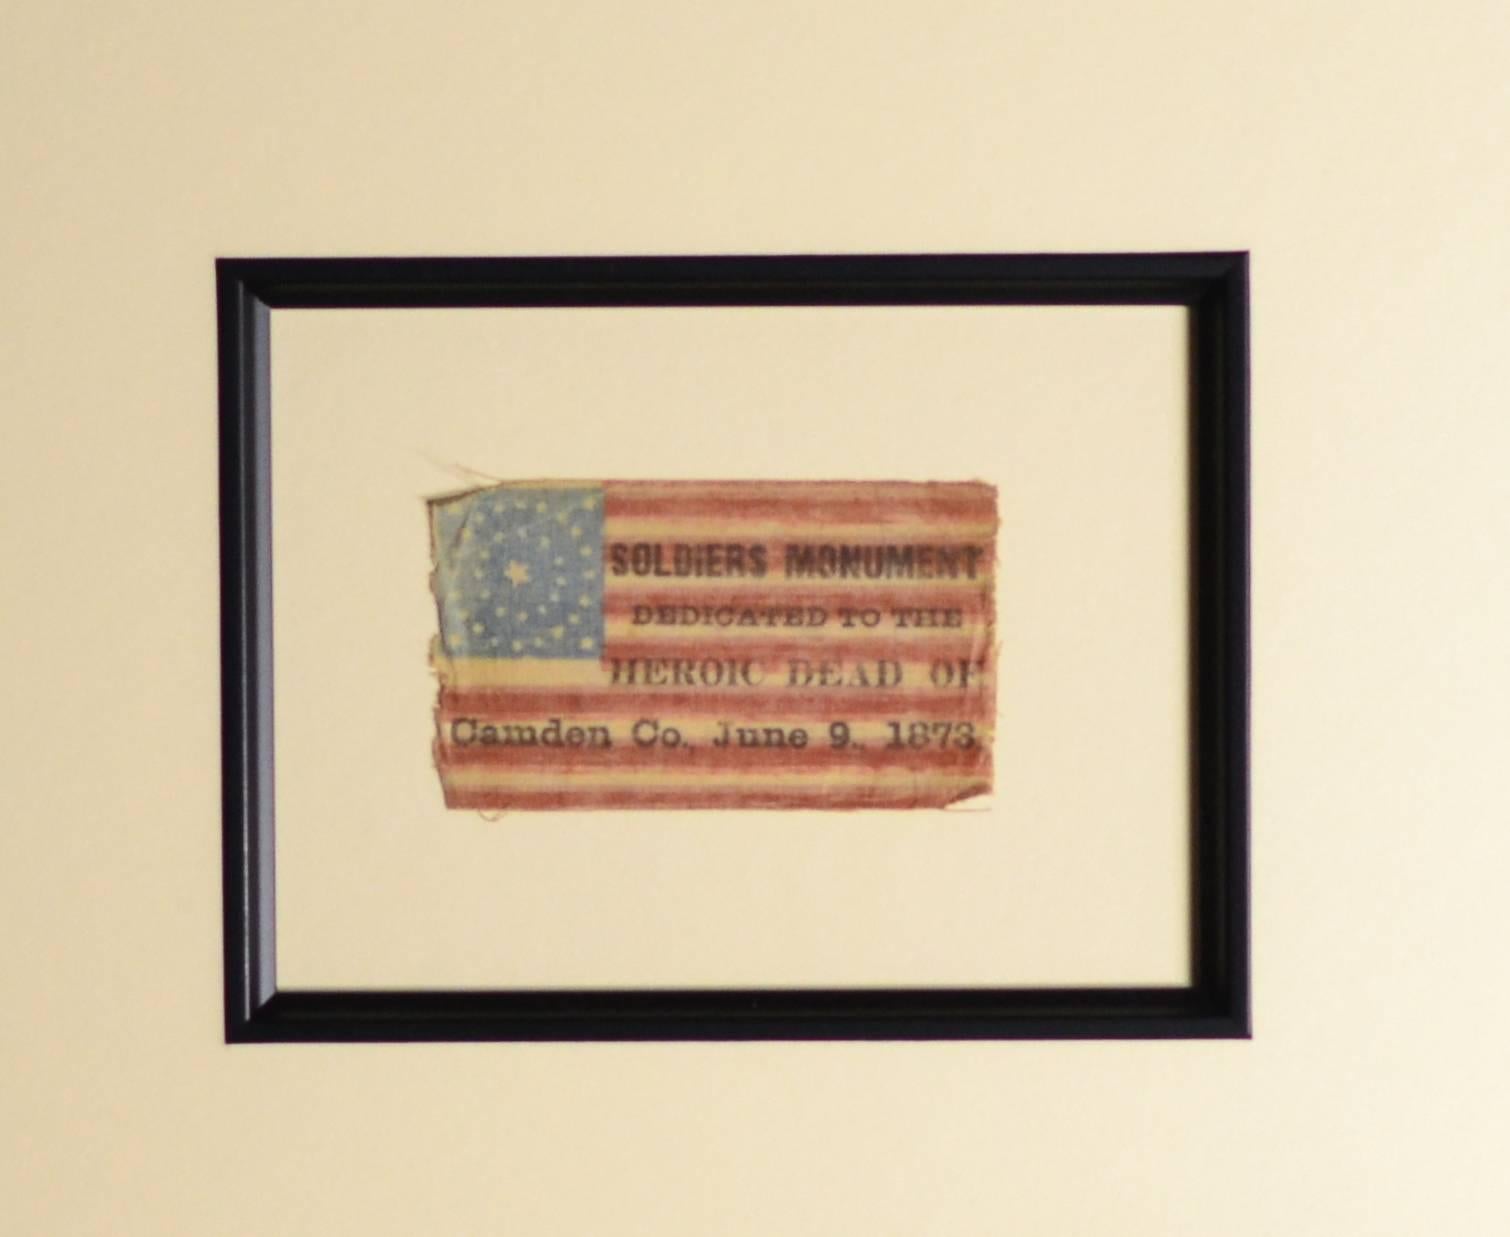 Rare 38 Star Flag from 1876 with a very rare star arrangement called a double wreath medallion with large center star. Made to celebrate this event. Made of starched gauze.
Flag is 2"x3.5" Frame 16"x17"
Museum framing with UV